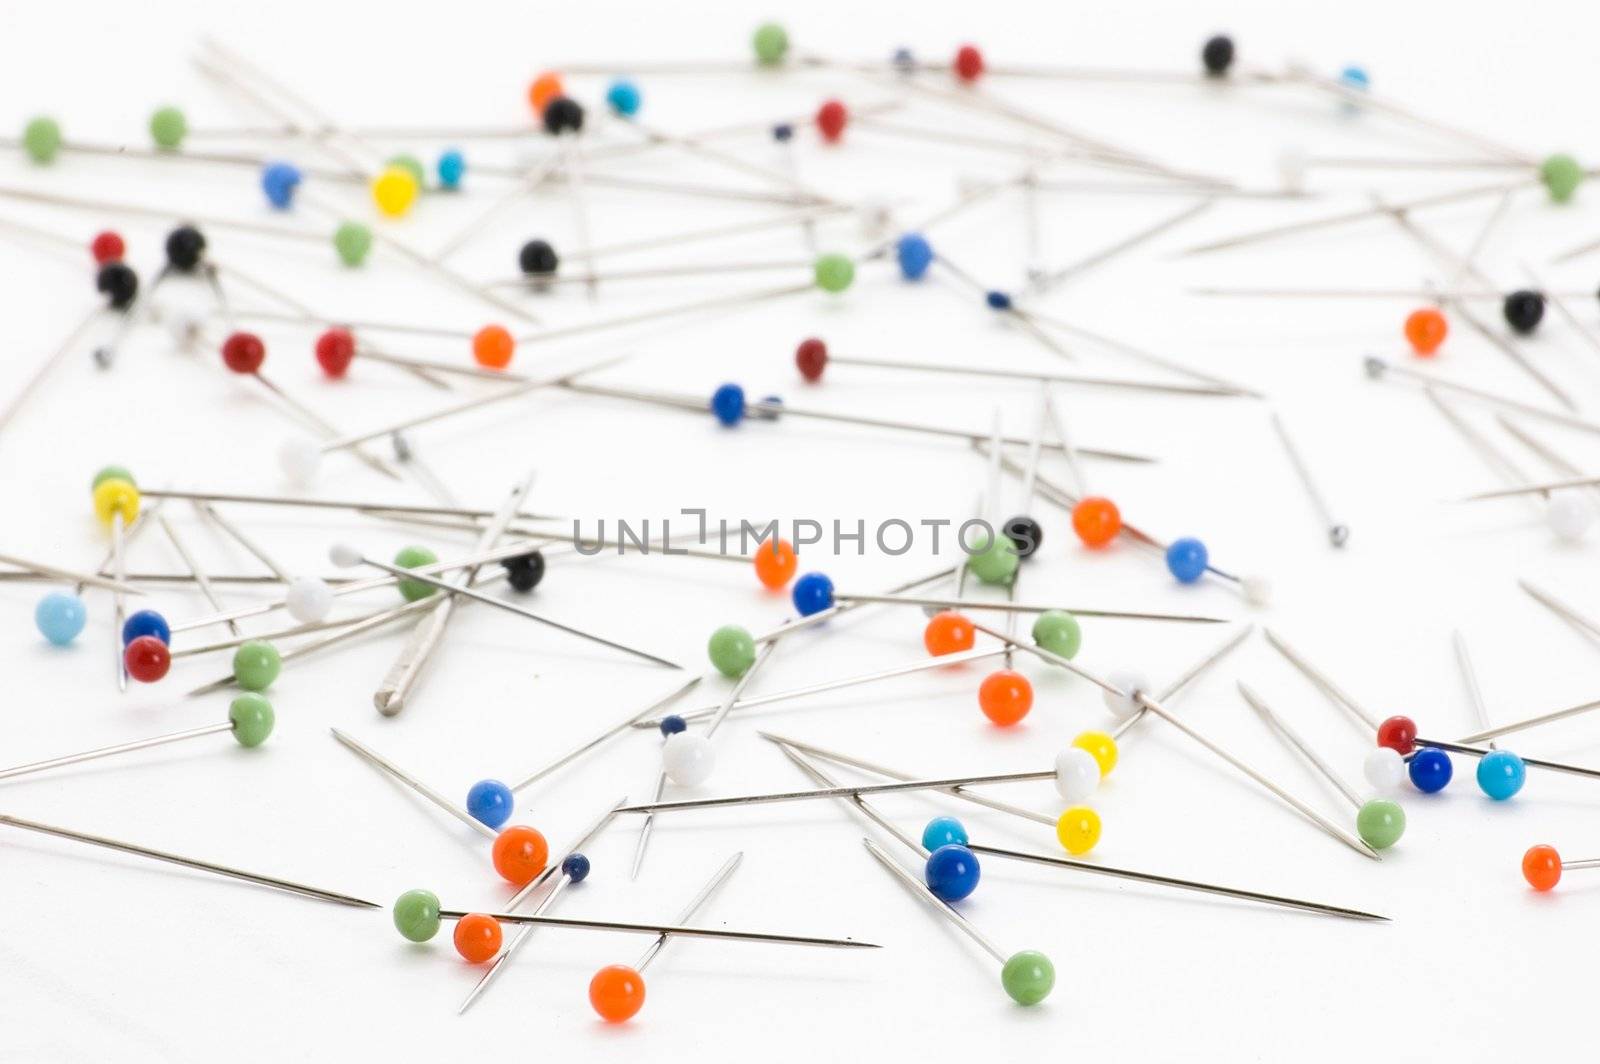 Handful of steel pins with colorful heads isolated on white